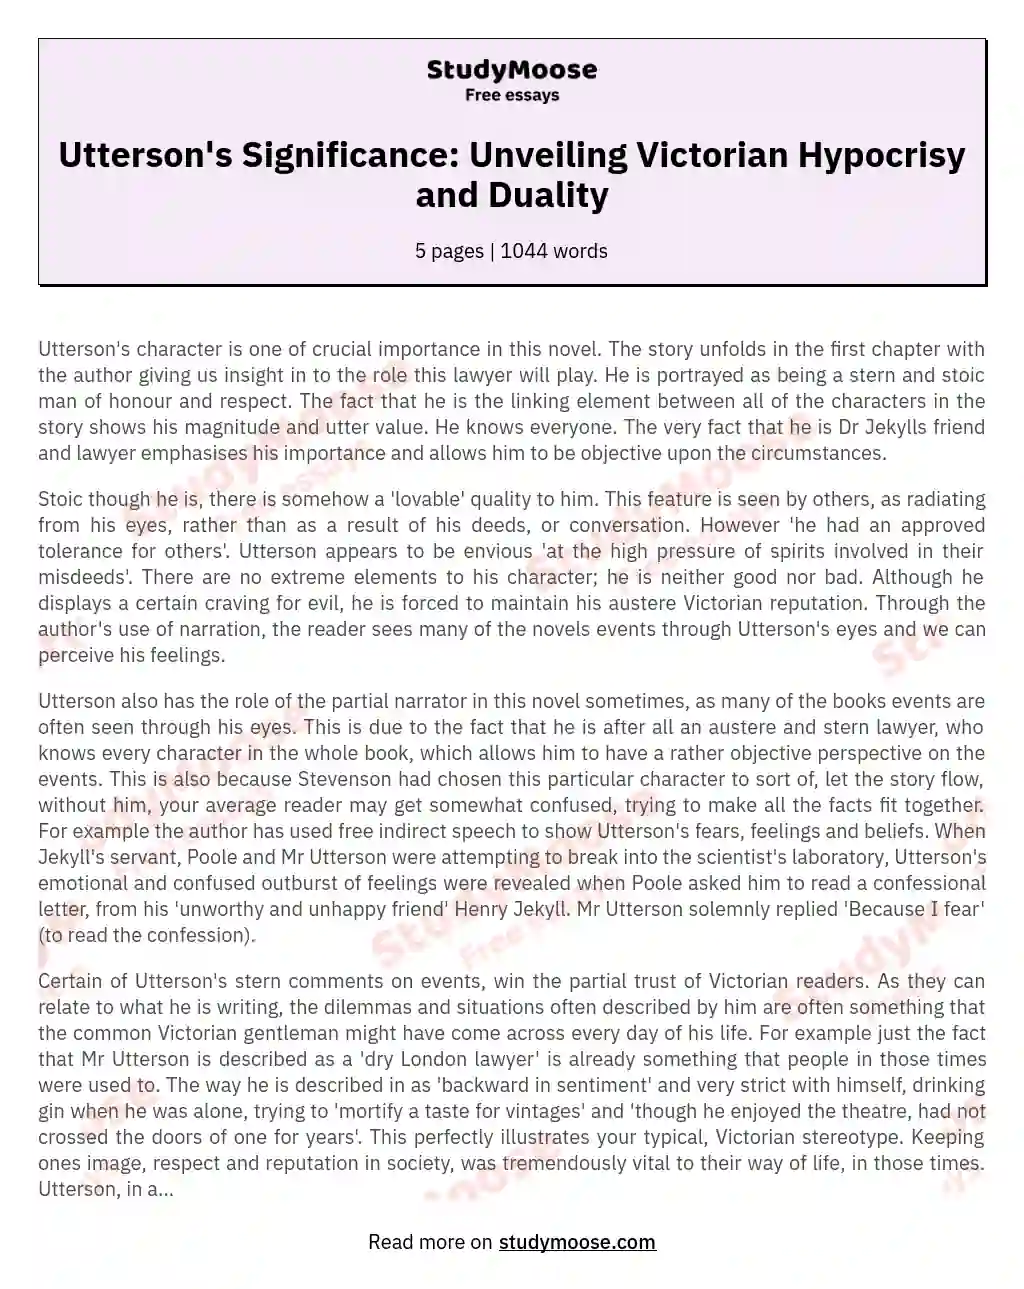 Utterson's Significance: Unveiling Victorian Hypocrisy and Duality essay